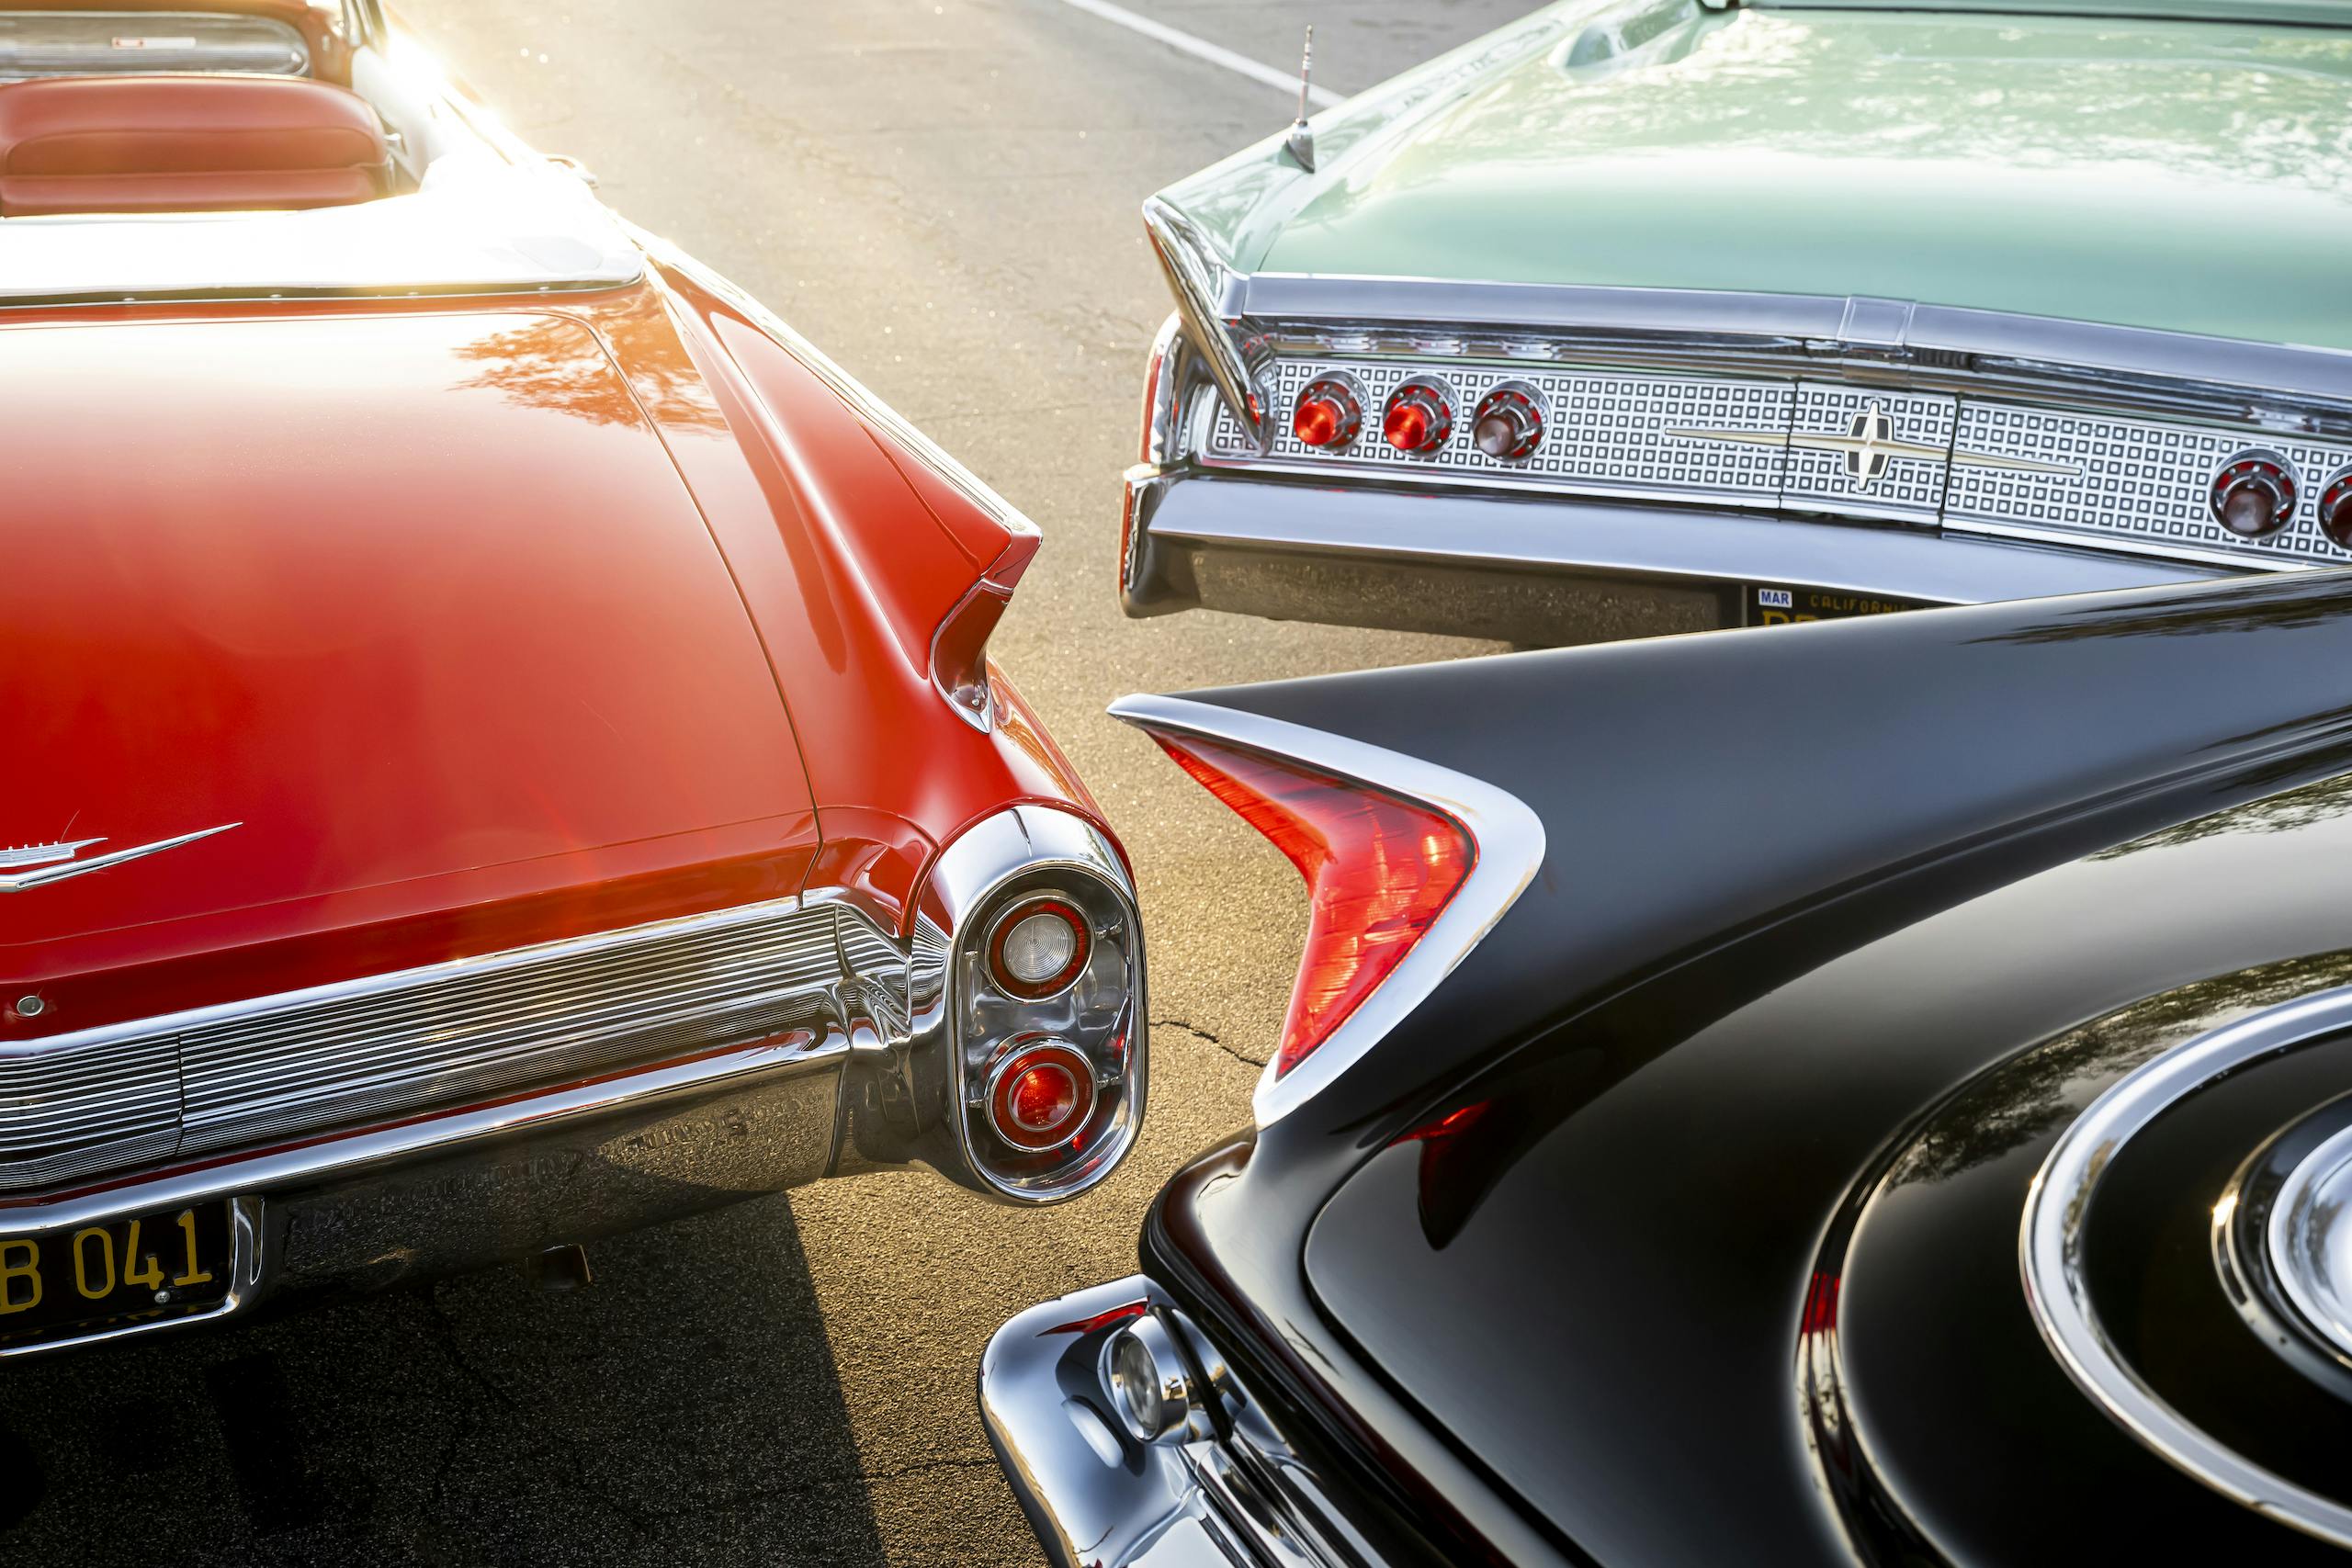 Three 1960 drop-tops mark the fin-tastic last days of an American obsession  - Hagerty Media